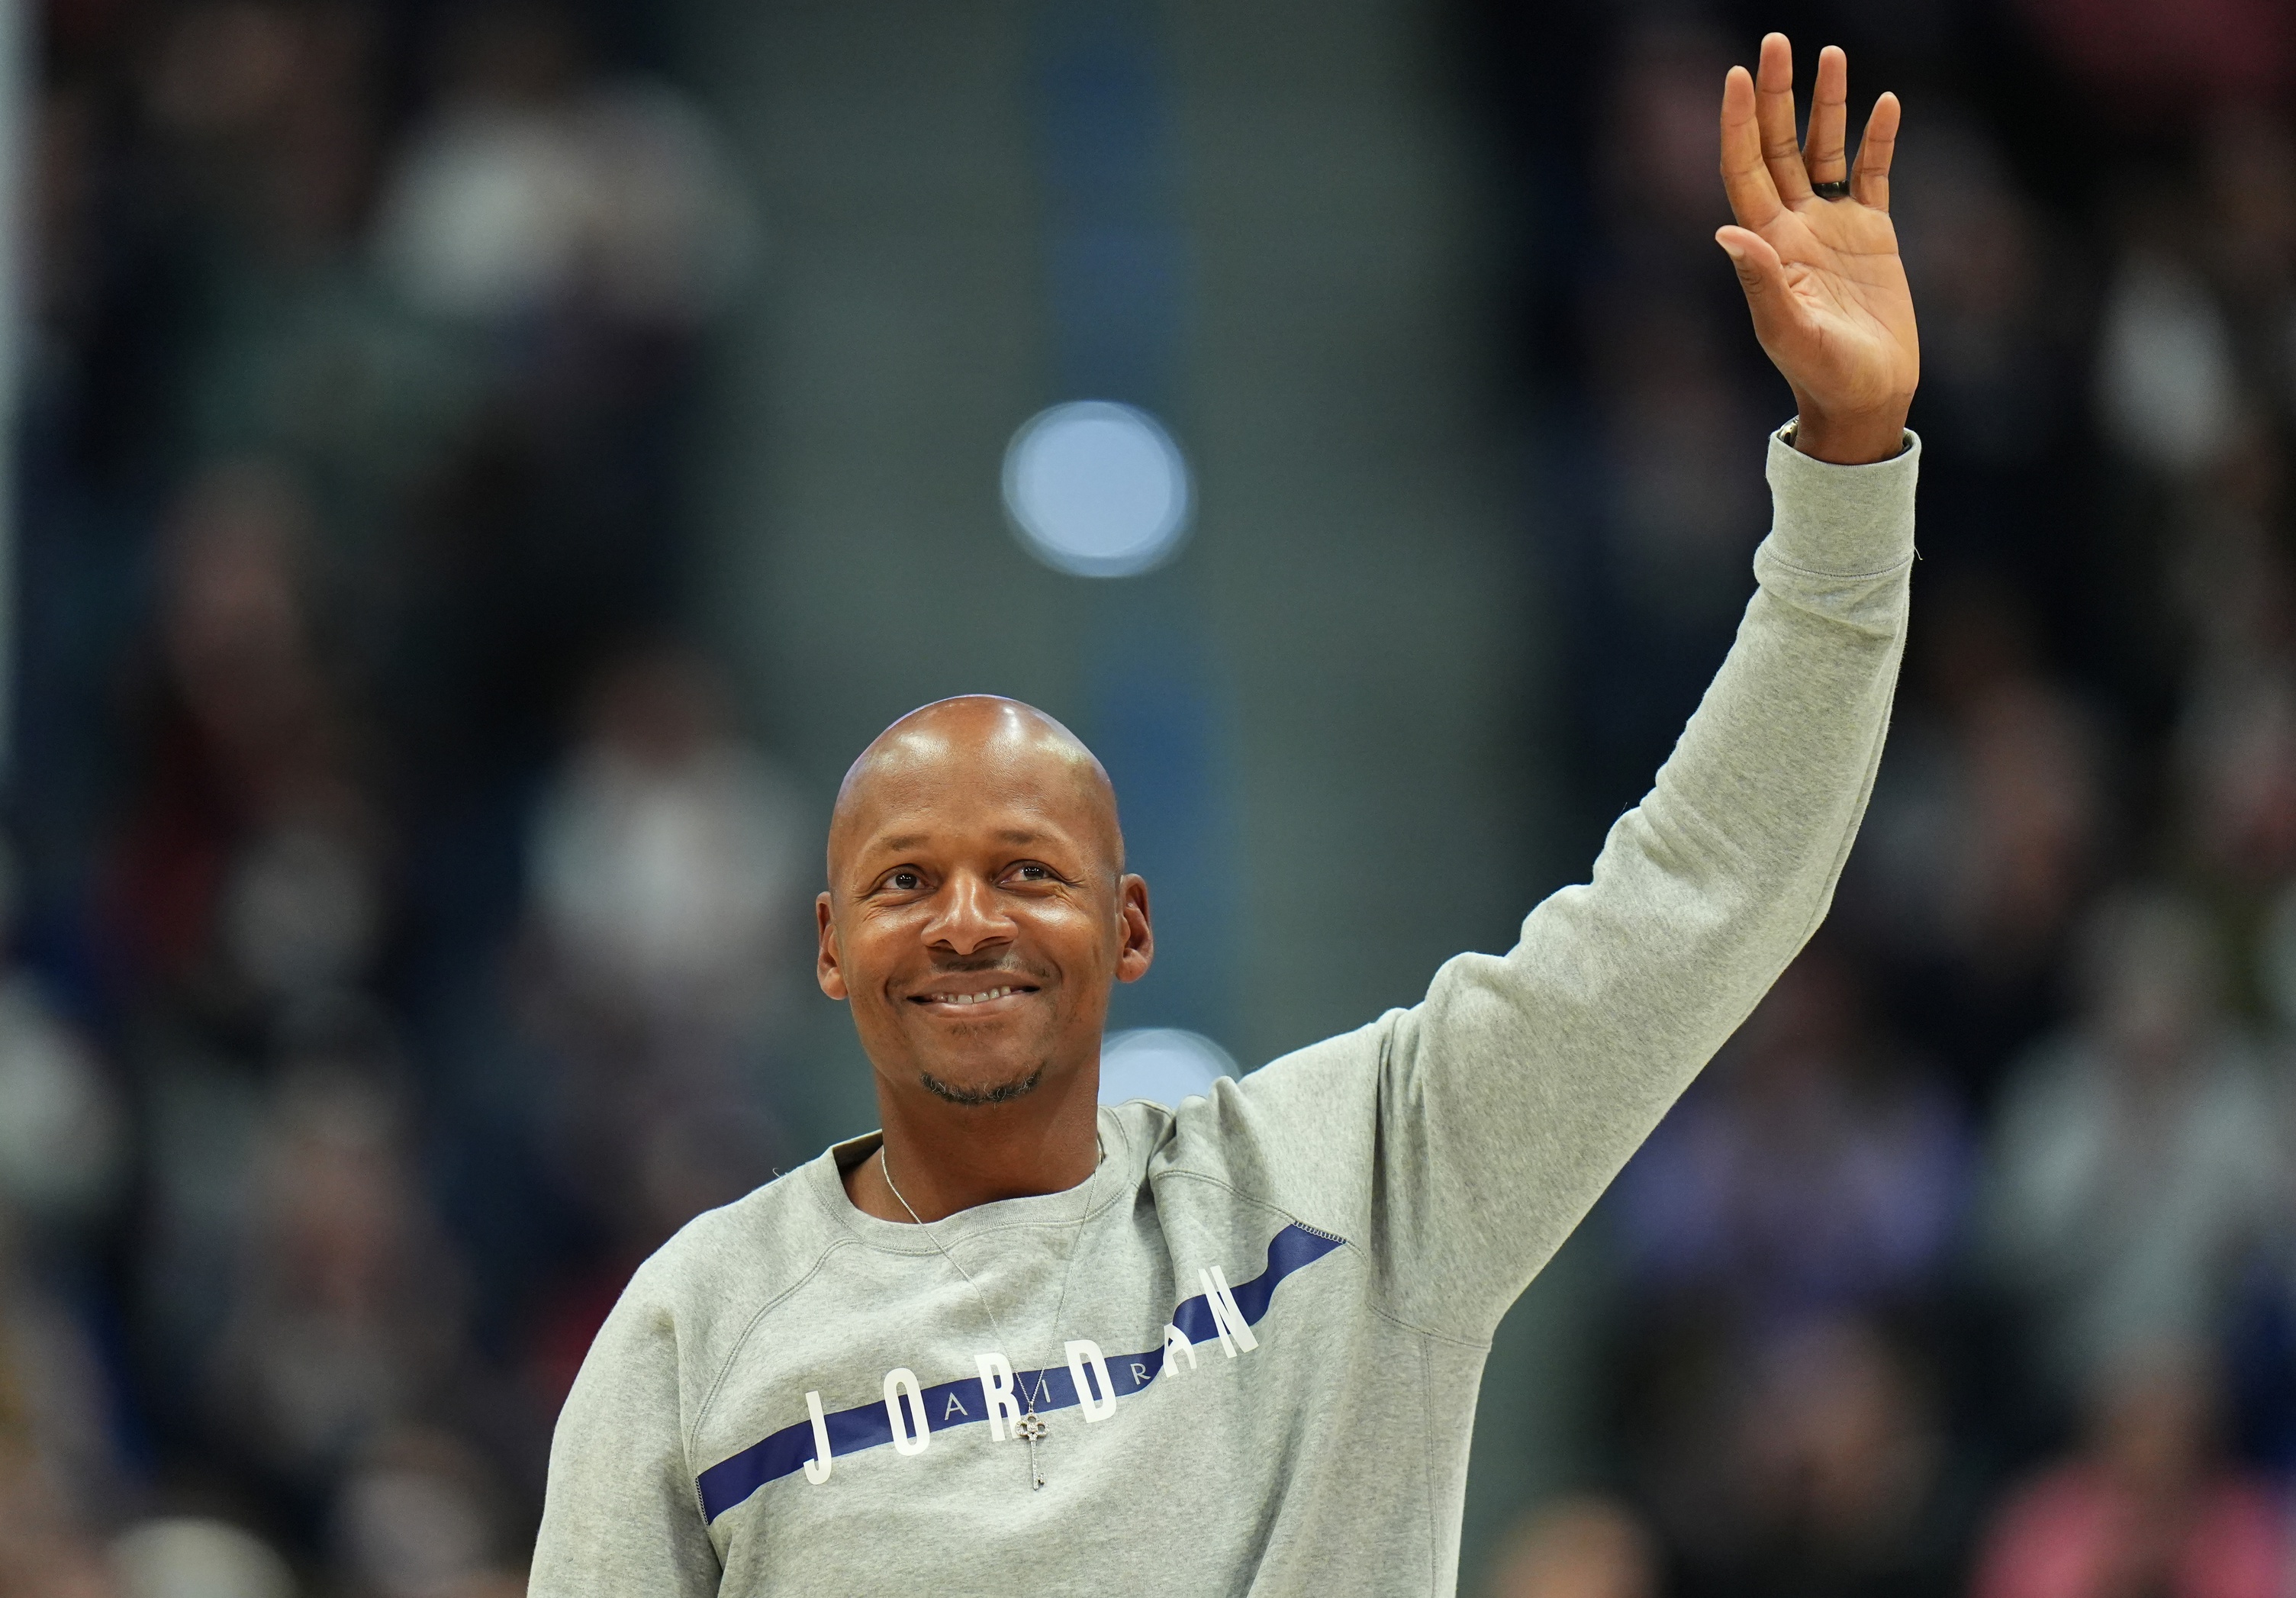 Former UConn Huskies and NBA player Ray Allen steps onto the court 